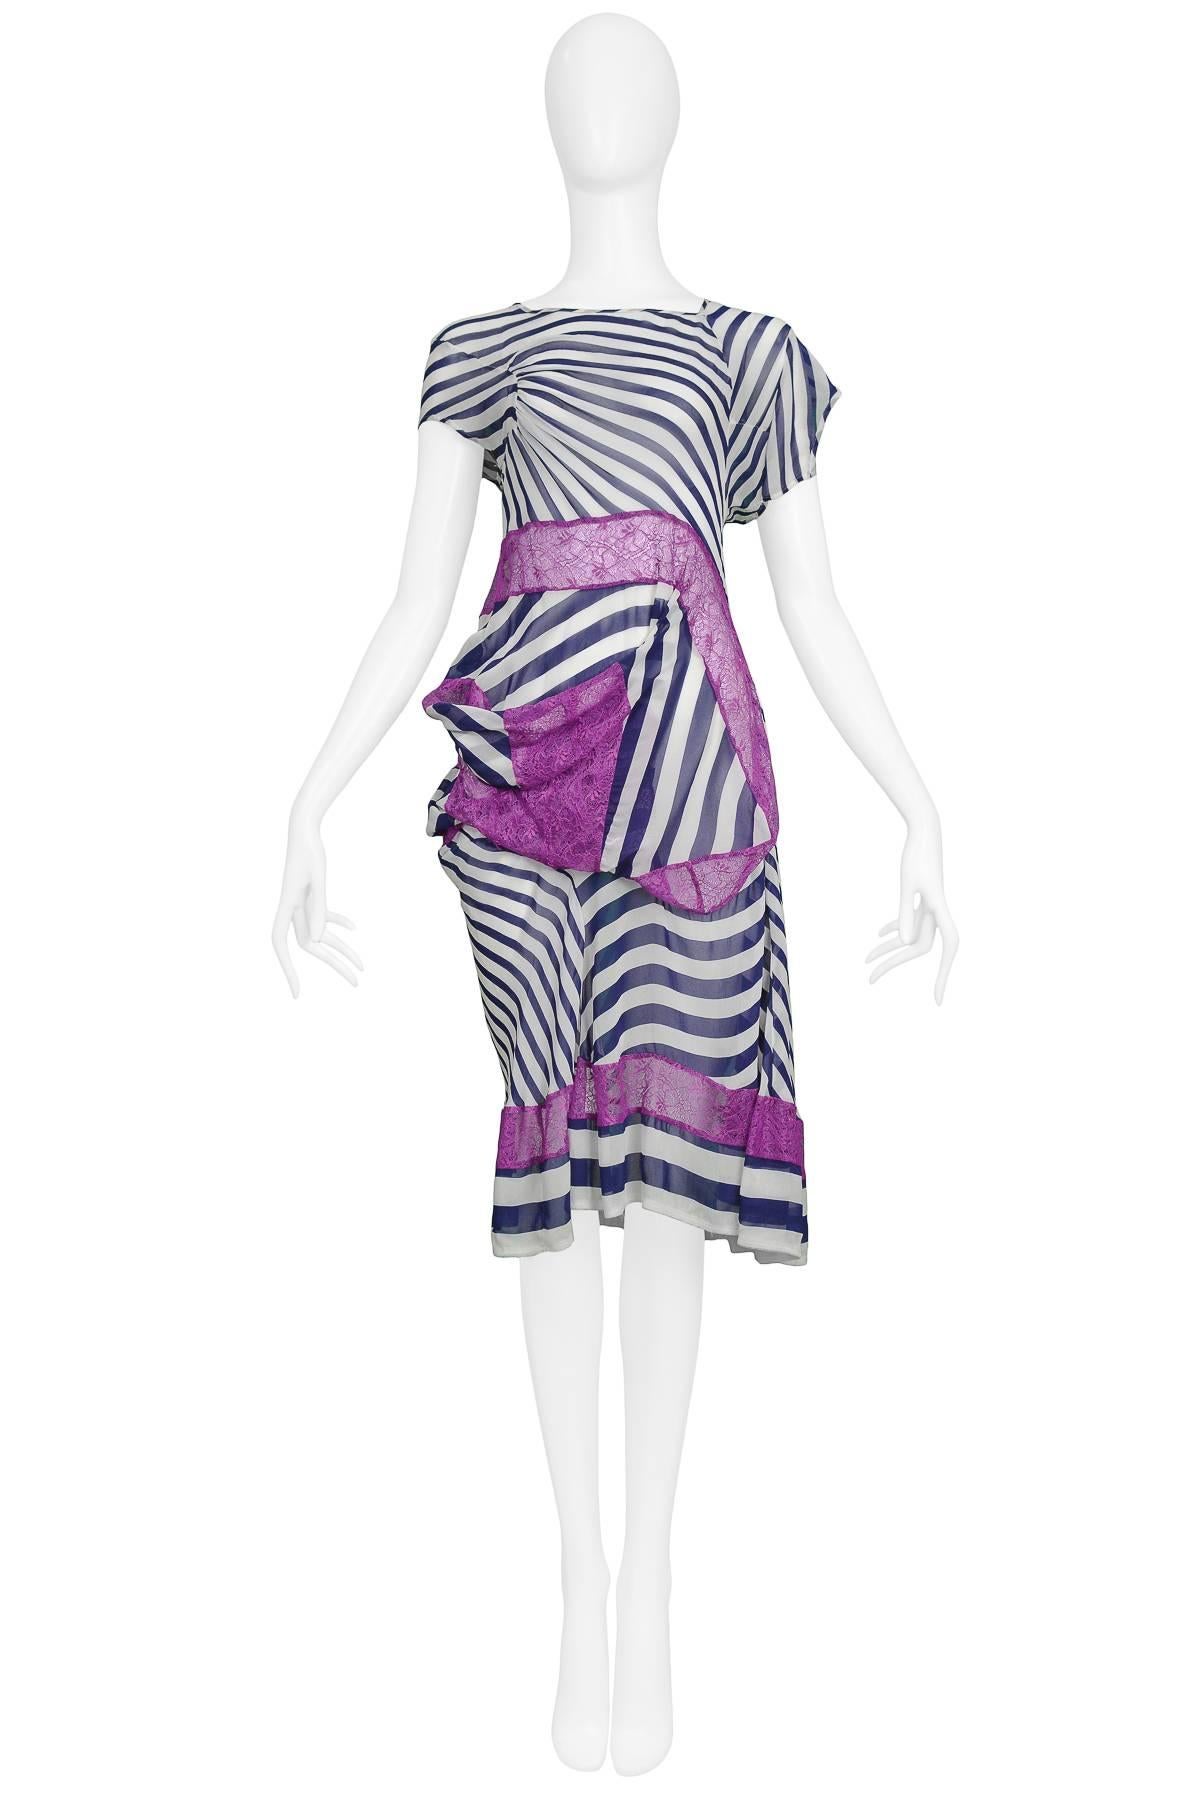 Vintage Junya Watanabe white and navy stripe knee length dress featuring abstract cap sleeves and purple lace draped throughout bodice and lining the hem. Runway piece from the Spring/Summer 2011 Collection.

Excellent Condition.

Size: SMALL